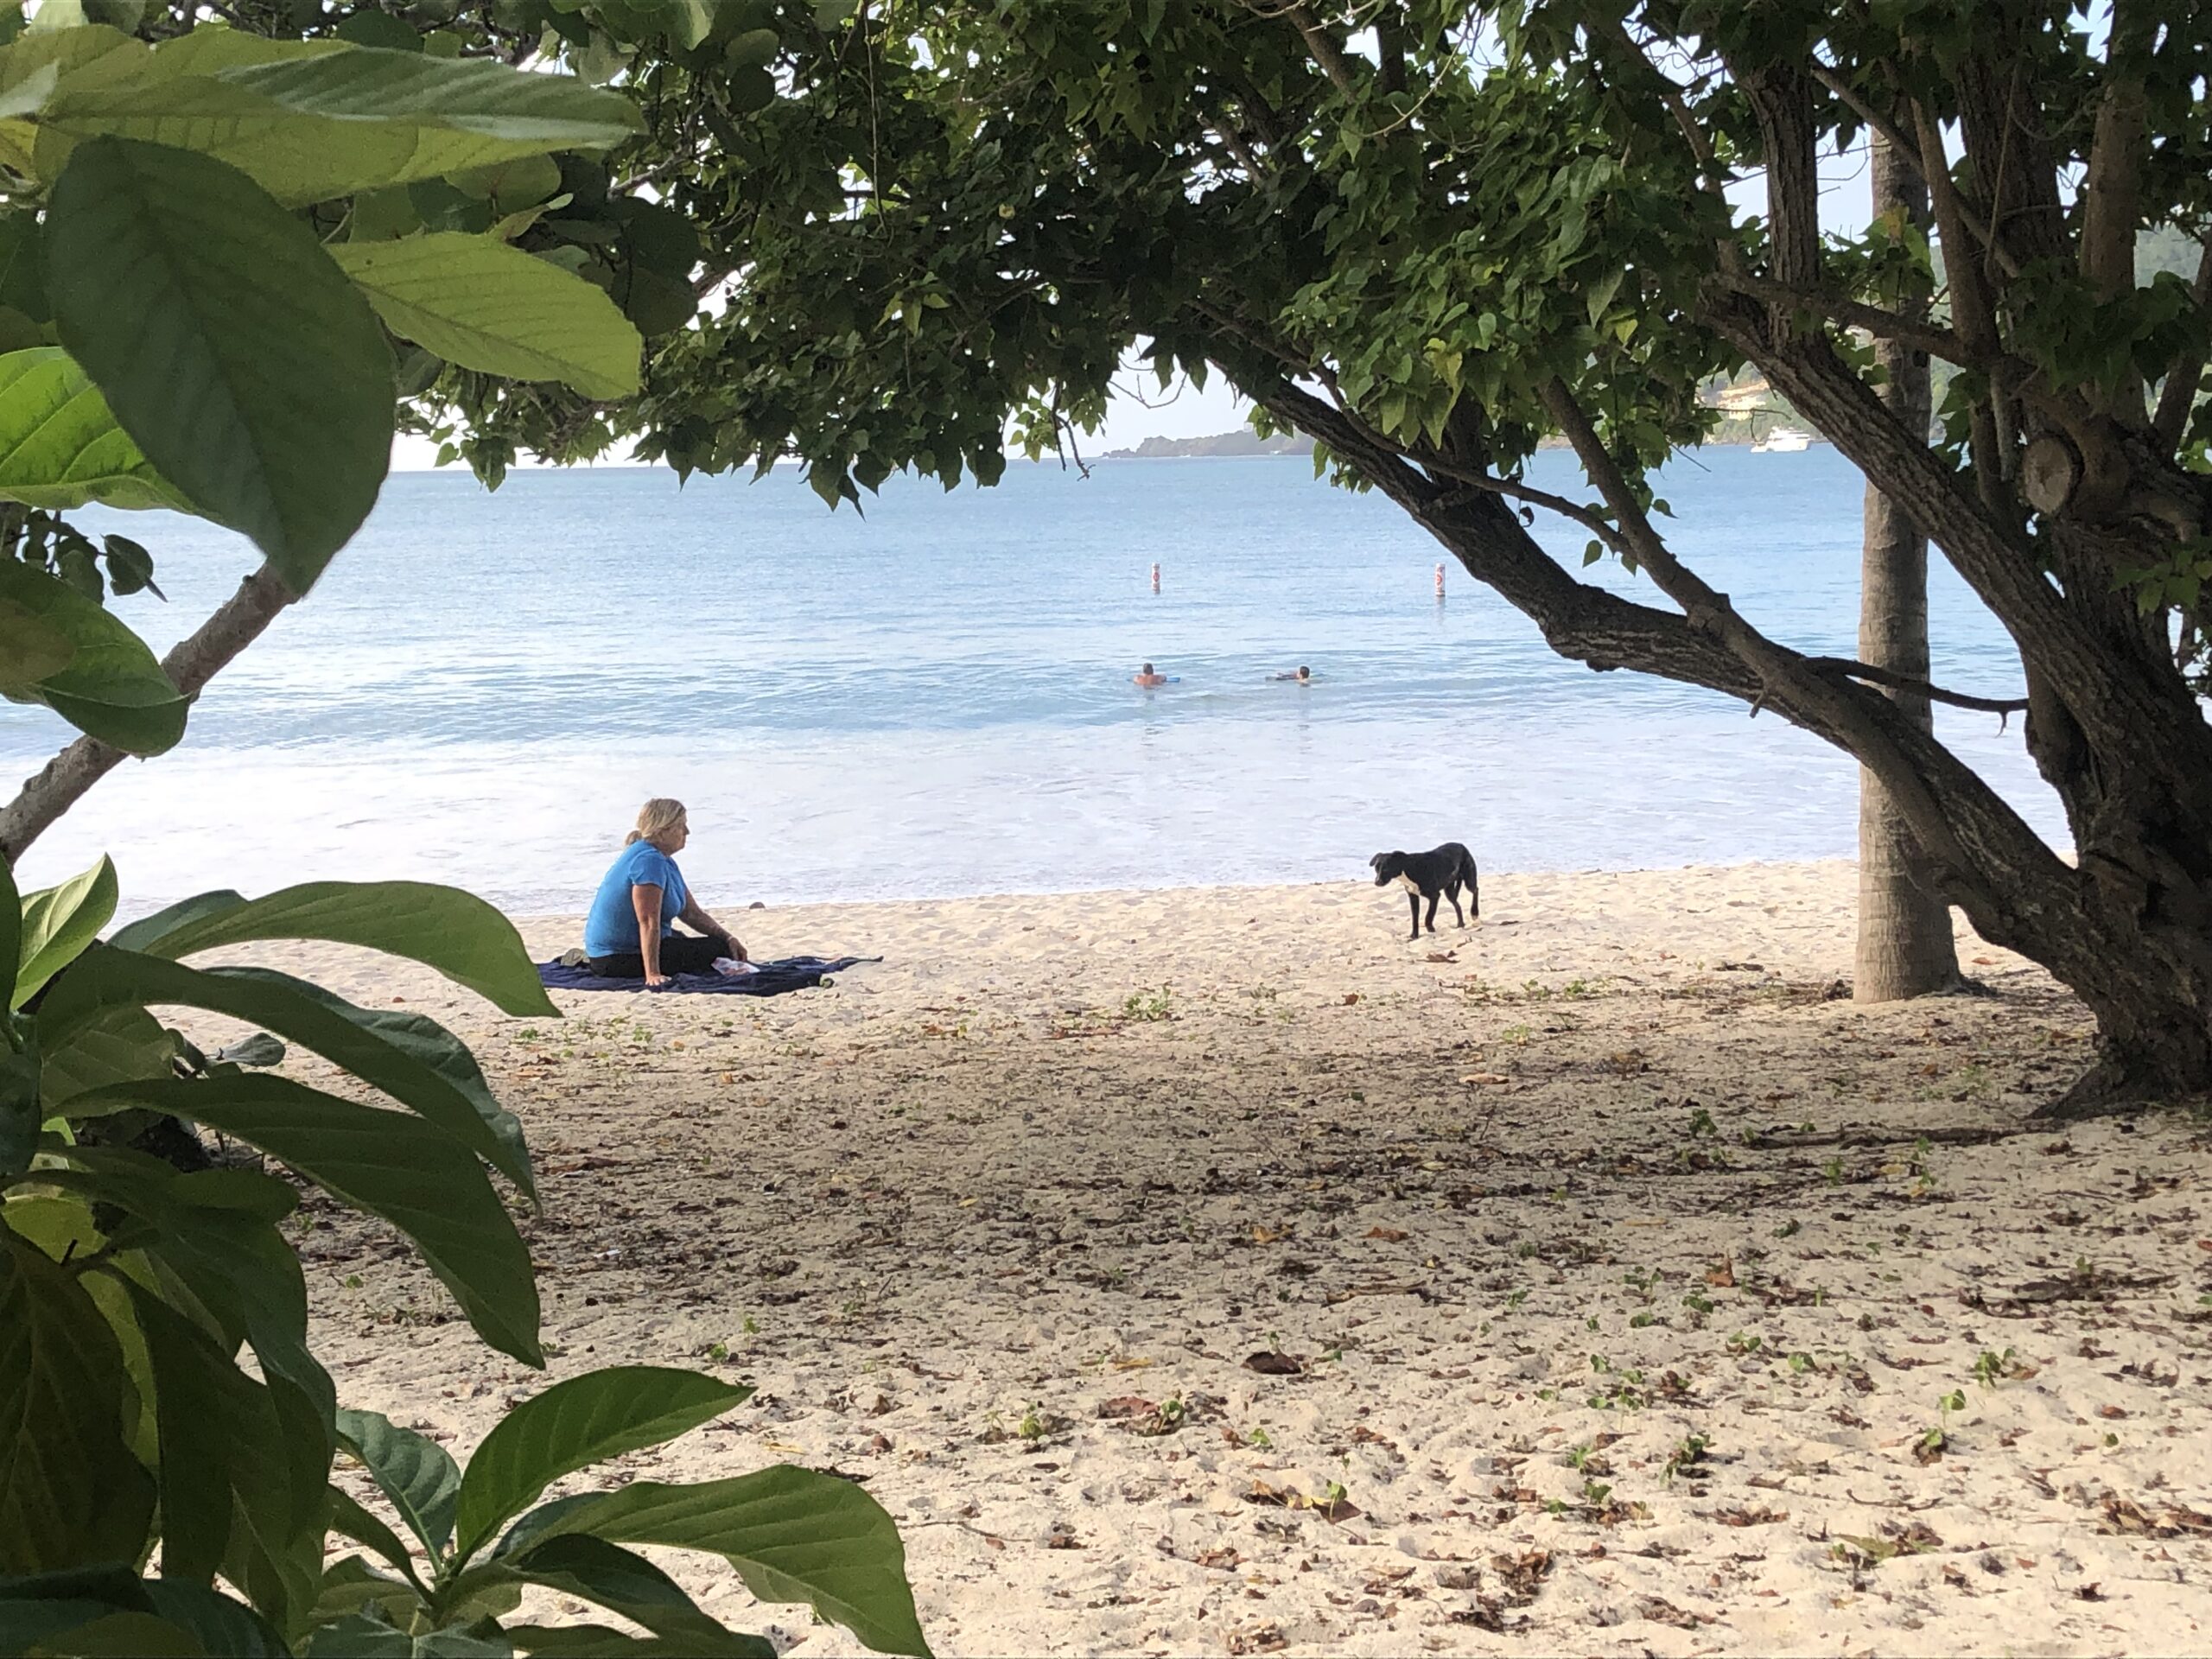 Jen Dean, executive director of the Humane Society of St. Thomas, works to gain the trust of one of the stray dogs at Magens Bay beach on Friday evening. (Source photo by Sian Cobb)